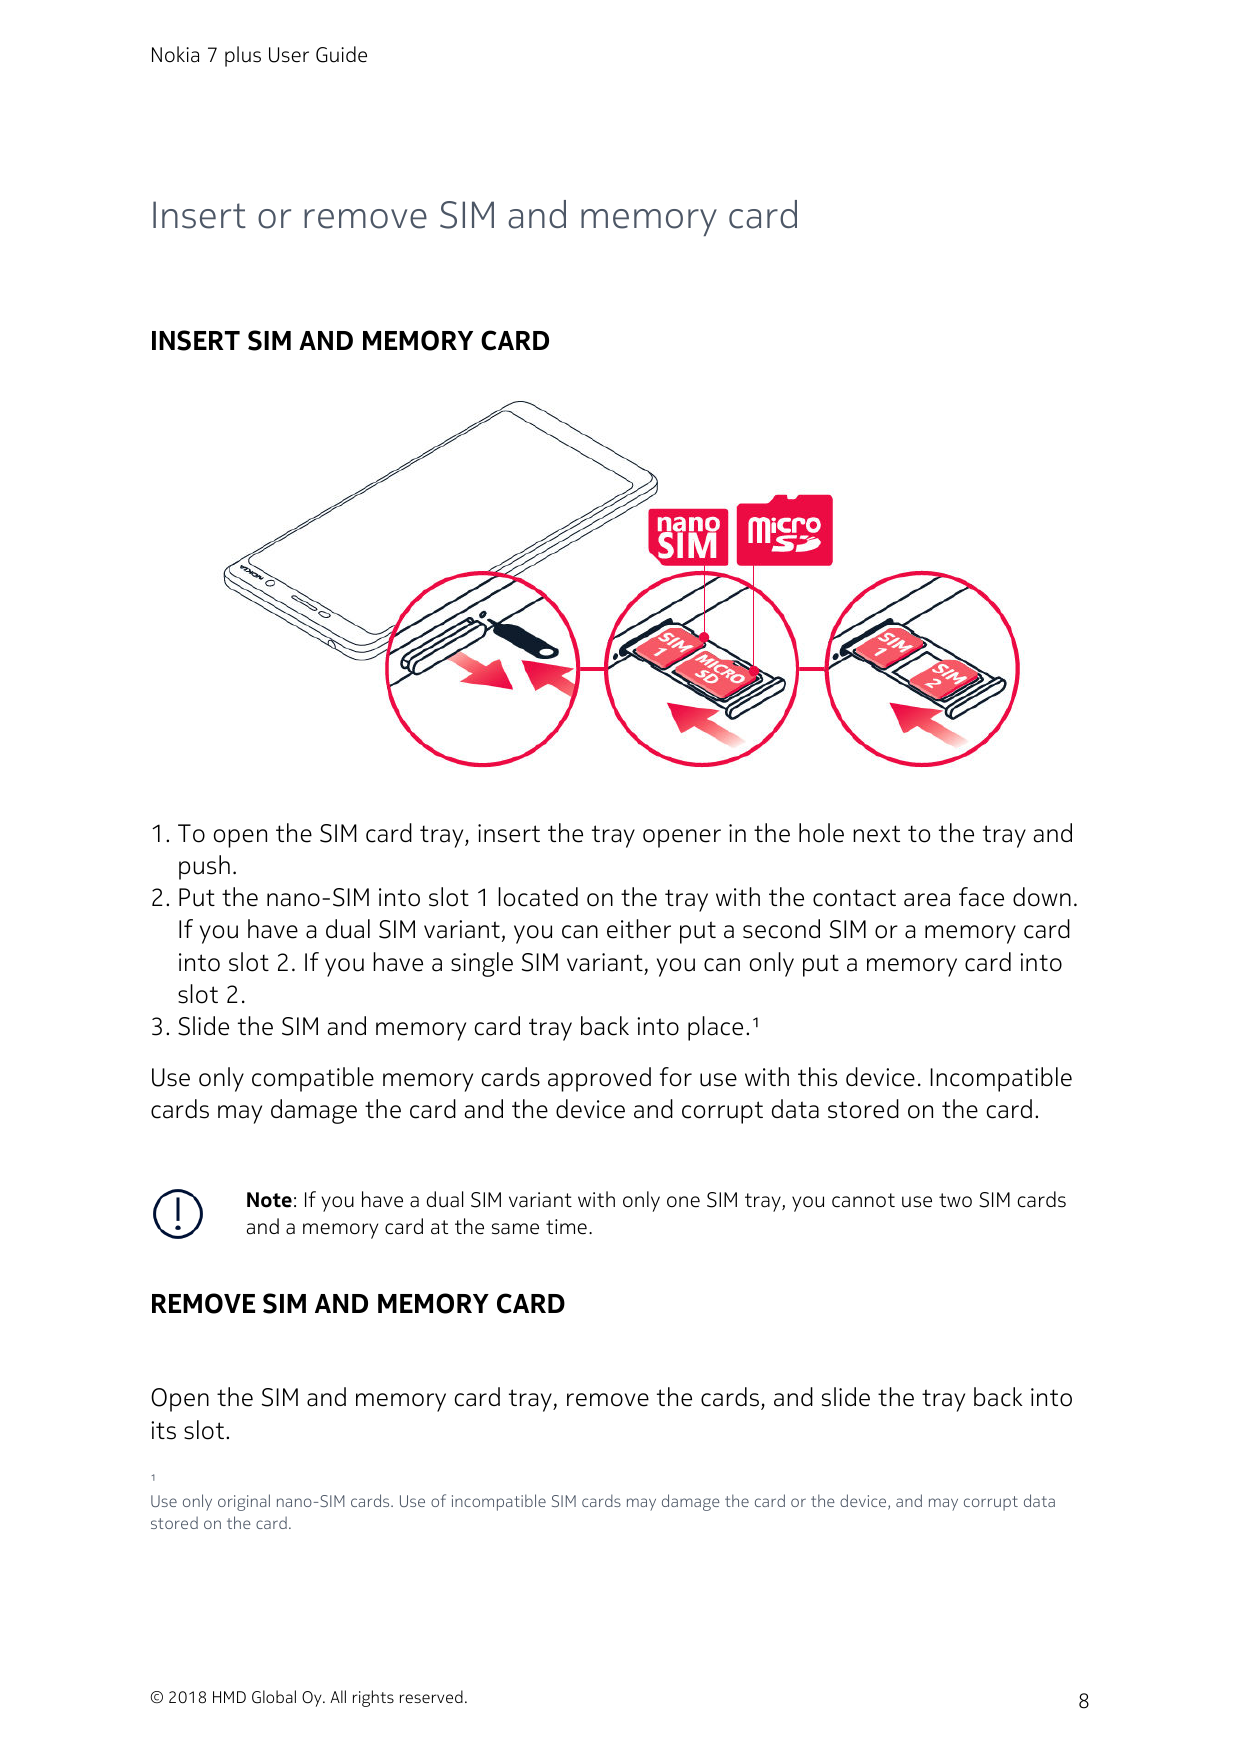 Nokia 7 plus User GuideInsert or remove SIM and memory cardINSERT SIM AND MEMORY CARD1. To open the SIM card tray, insert the tr